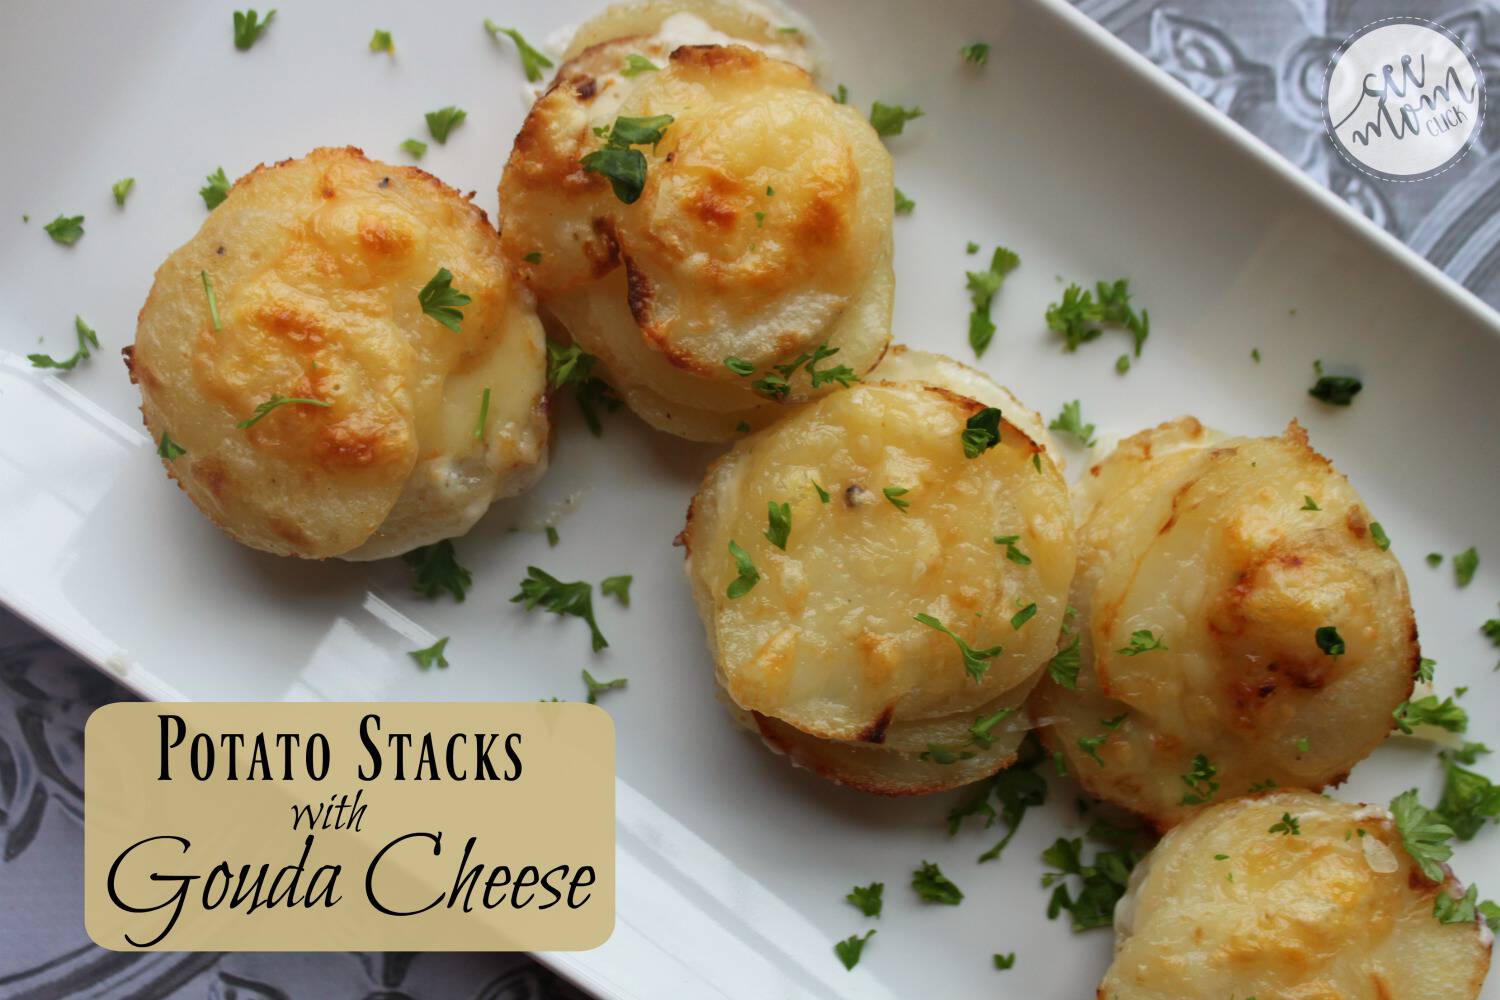 You truly won't believe how easy this Potato Stacks with Gouda Cheese Recipe is to make and how delicious it is with Wisconsin Cheese gouda! A perfect easy side dish recipe, especially for my fellow potato lovers! 